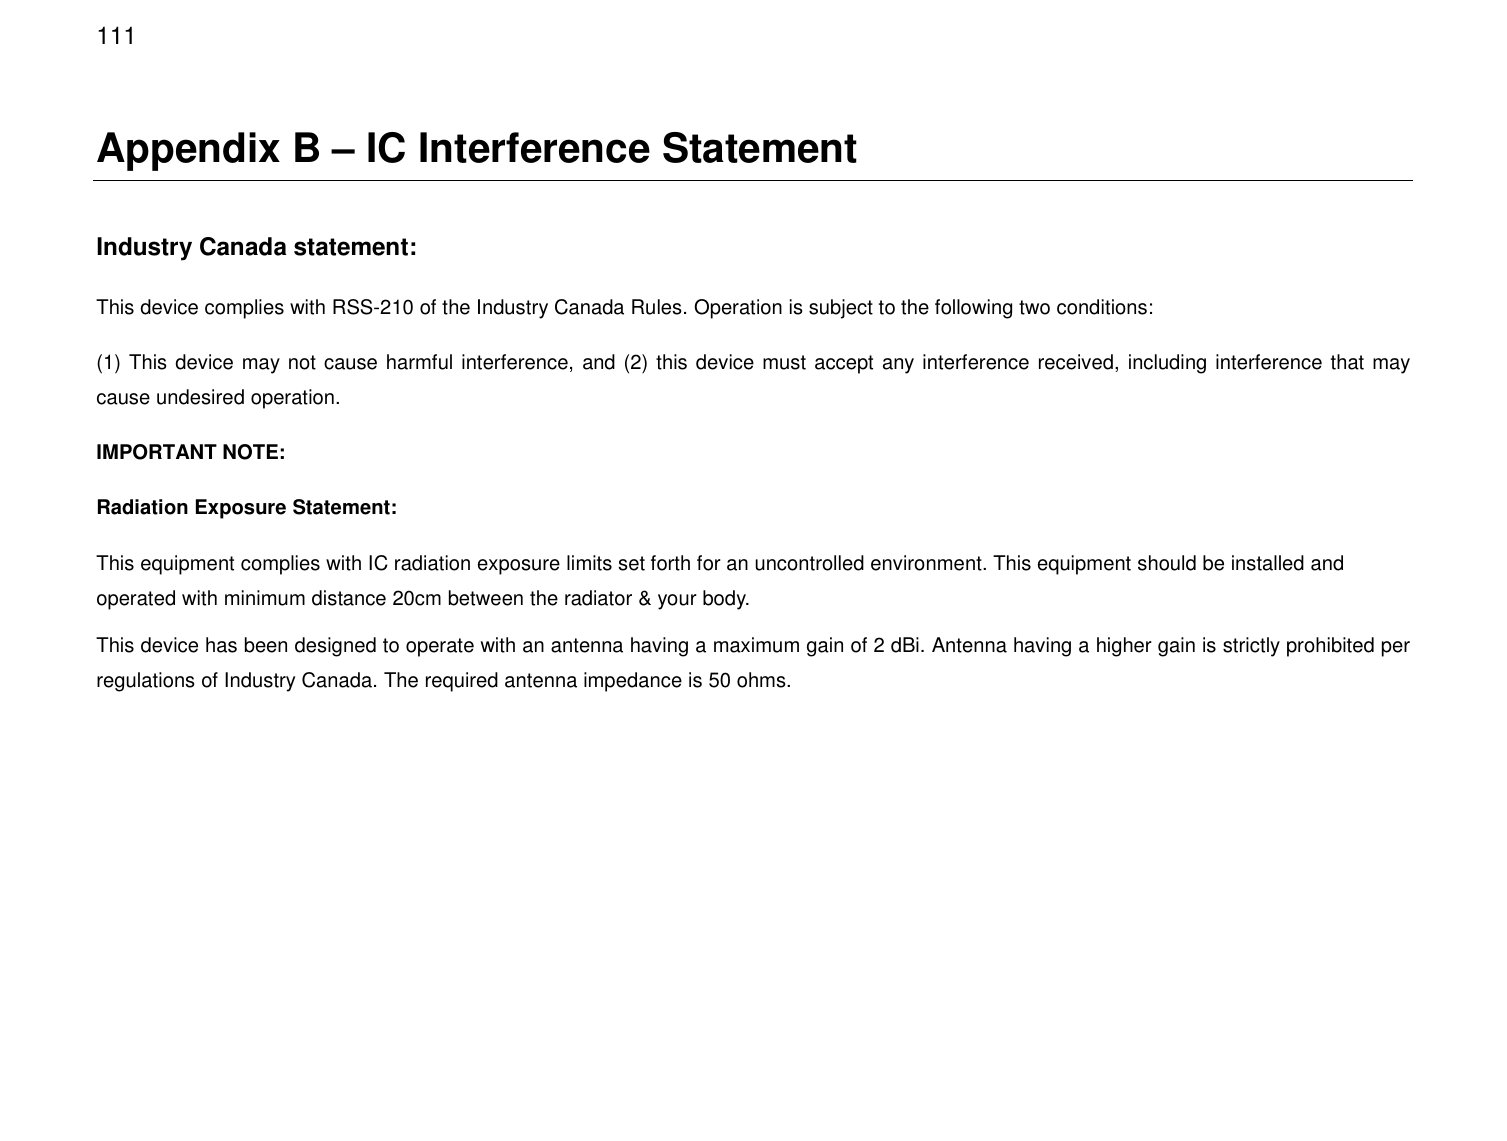  111 Appendix B – IC Interference Statement  Industry Canada statement: This device complies with RSS-210 of the Industry Canada Rules. Operation is subject to the following two conditions:  (1) This device may not cause harmful interference, and (2) this device must accept any interference received, including interference that may cause undesired operation. IMPORTANT NOTE: Radiation Exposure Statement: This equipment complies with IC radiation exposure limits set forth for an uncontrolled environment. This equipment should be installed and operated with minimum distance 20cm between the radiator &amp; your body. This device has been designed to operate with an antenna having a maximum gain of 2 dBi. Antenna having a higher gain is strictly prohibited per regulations of Industry Canada. The required antenna impedance is 50 ohms.  